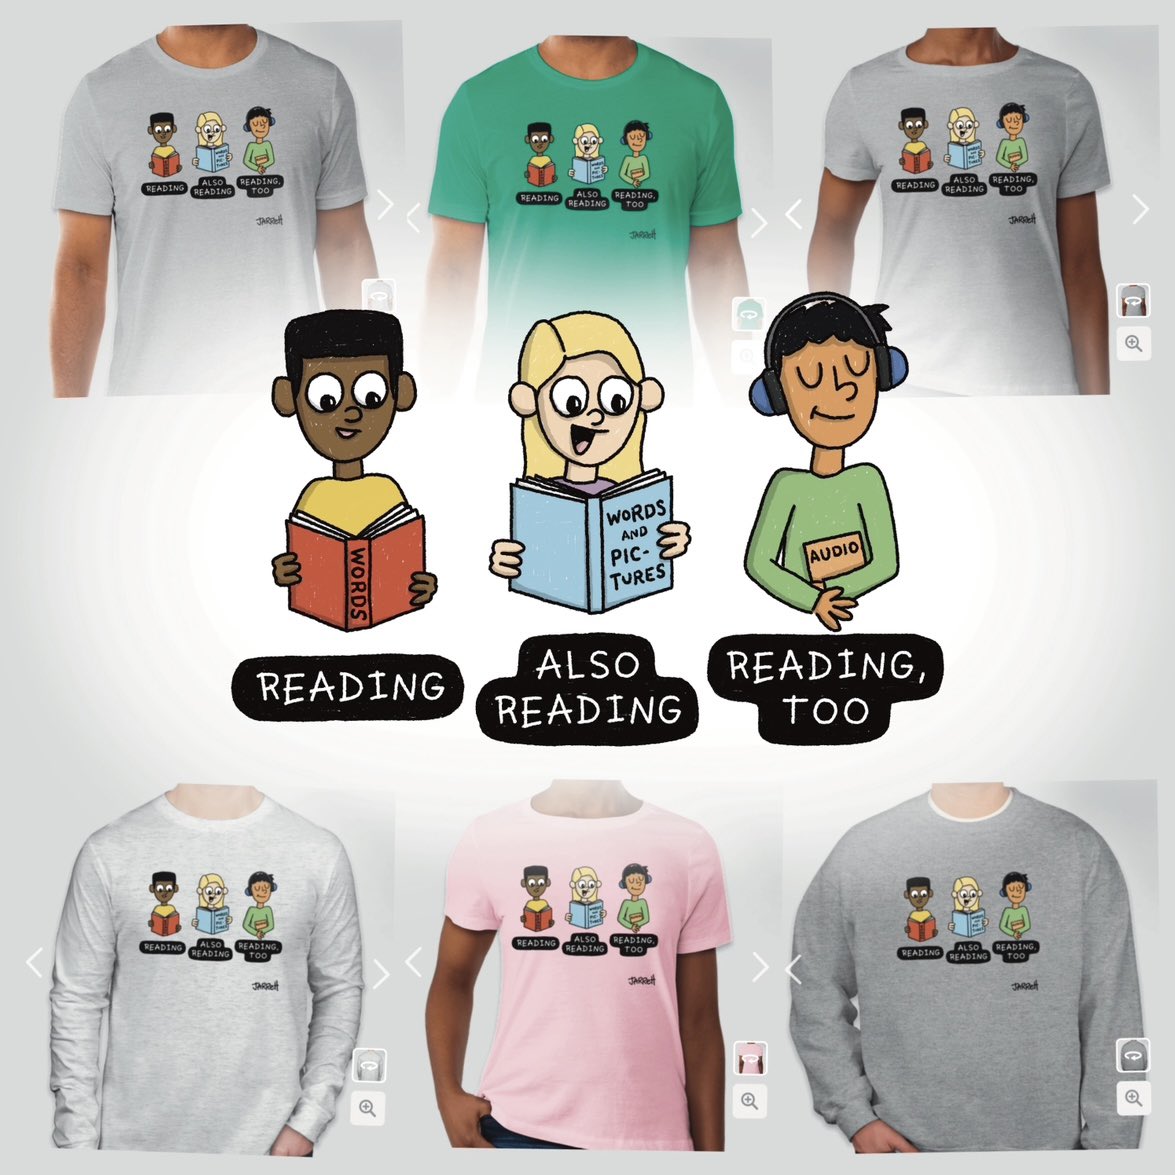 Did you miss your chance to get one of my “How Do YOU Read?” shirts, or do you want to grab another? Good news! They are back on sale — but only for two more weeks! Check out all the options and order here: customink.com/fundraising/ho…